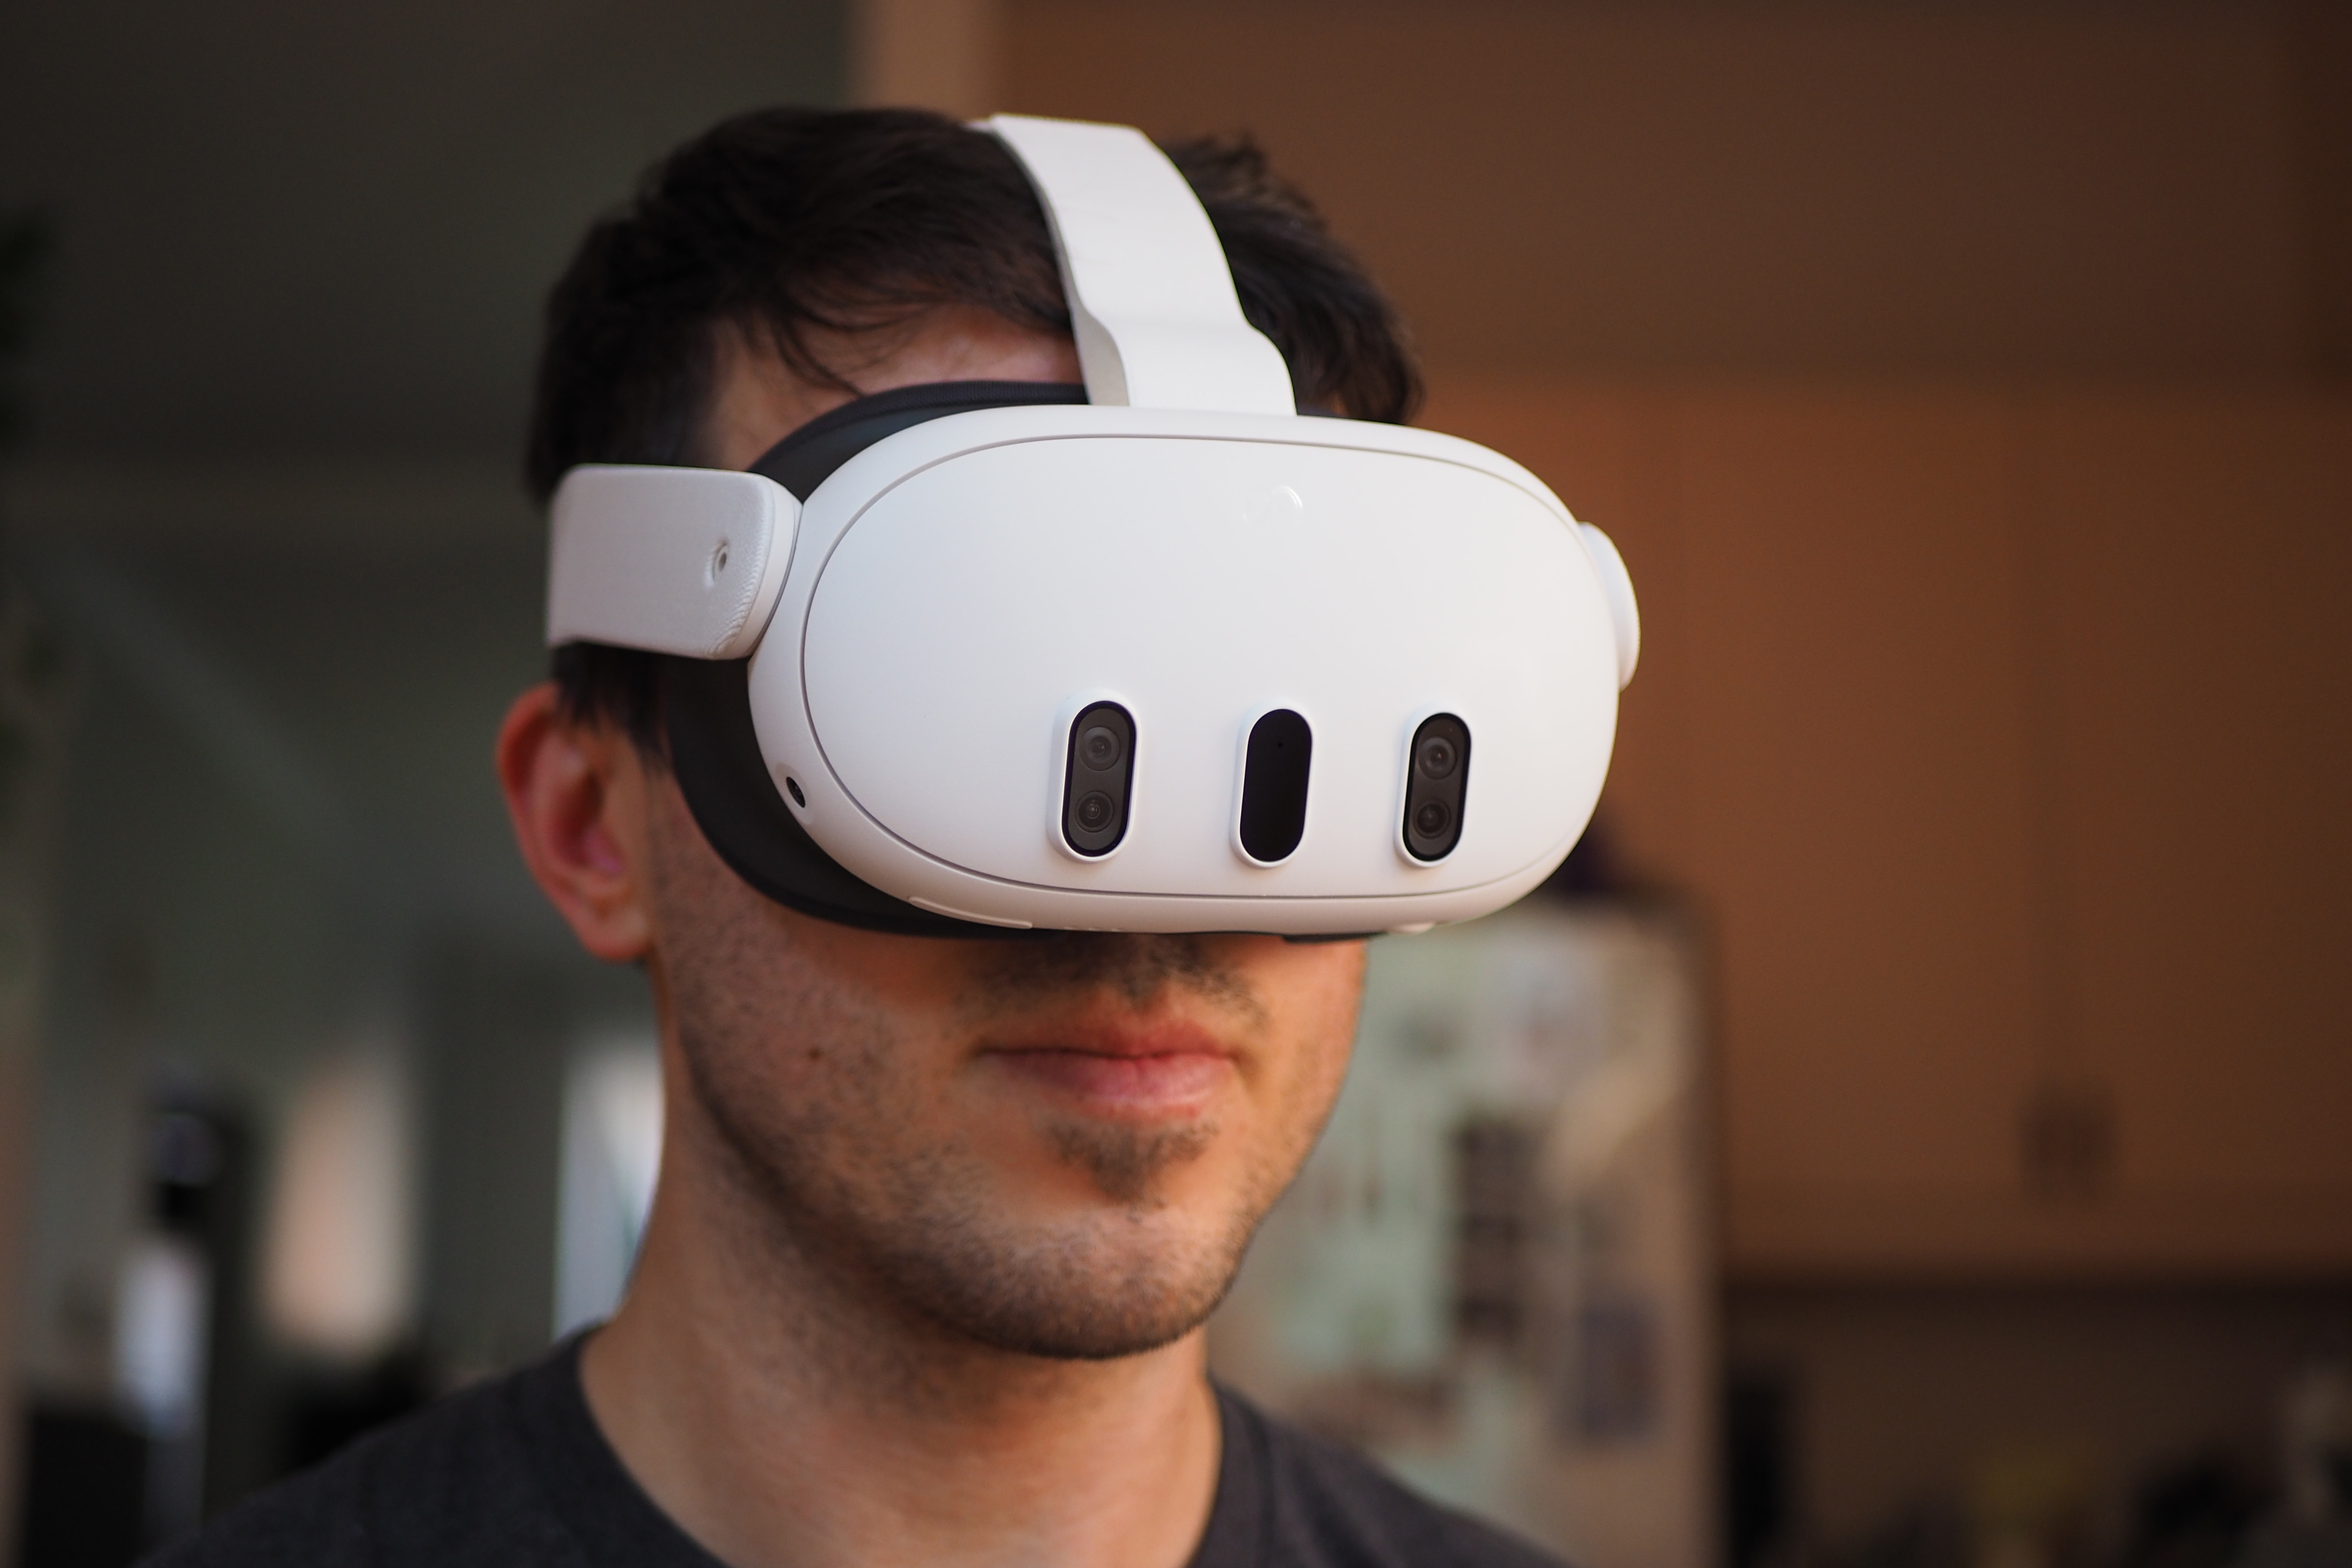 An image of Polygon editor, Cameron Faulkner, wearing the Quest 3 headset.